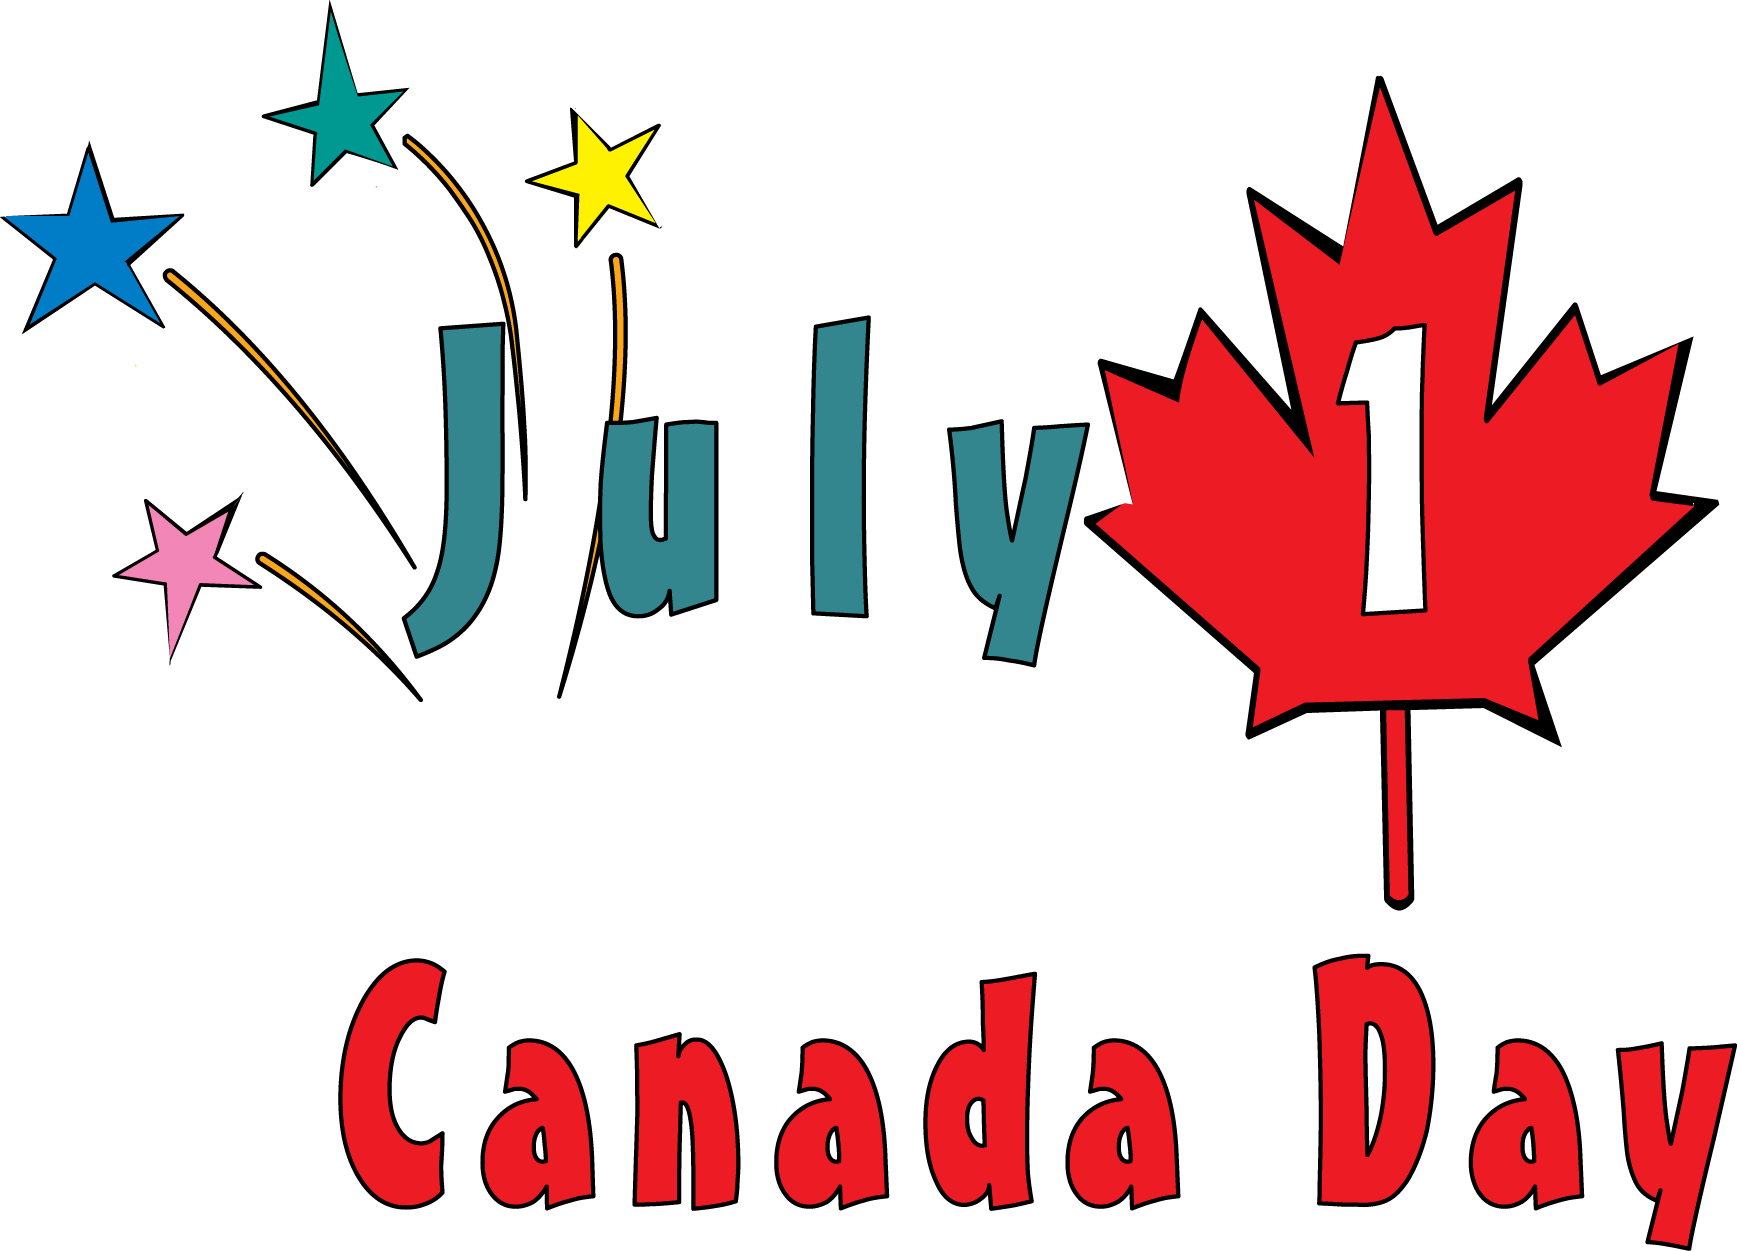 Happy Canada Day 2019 Image for Facebook